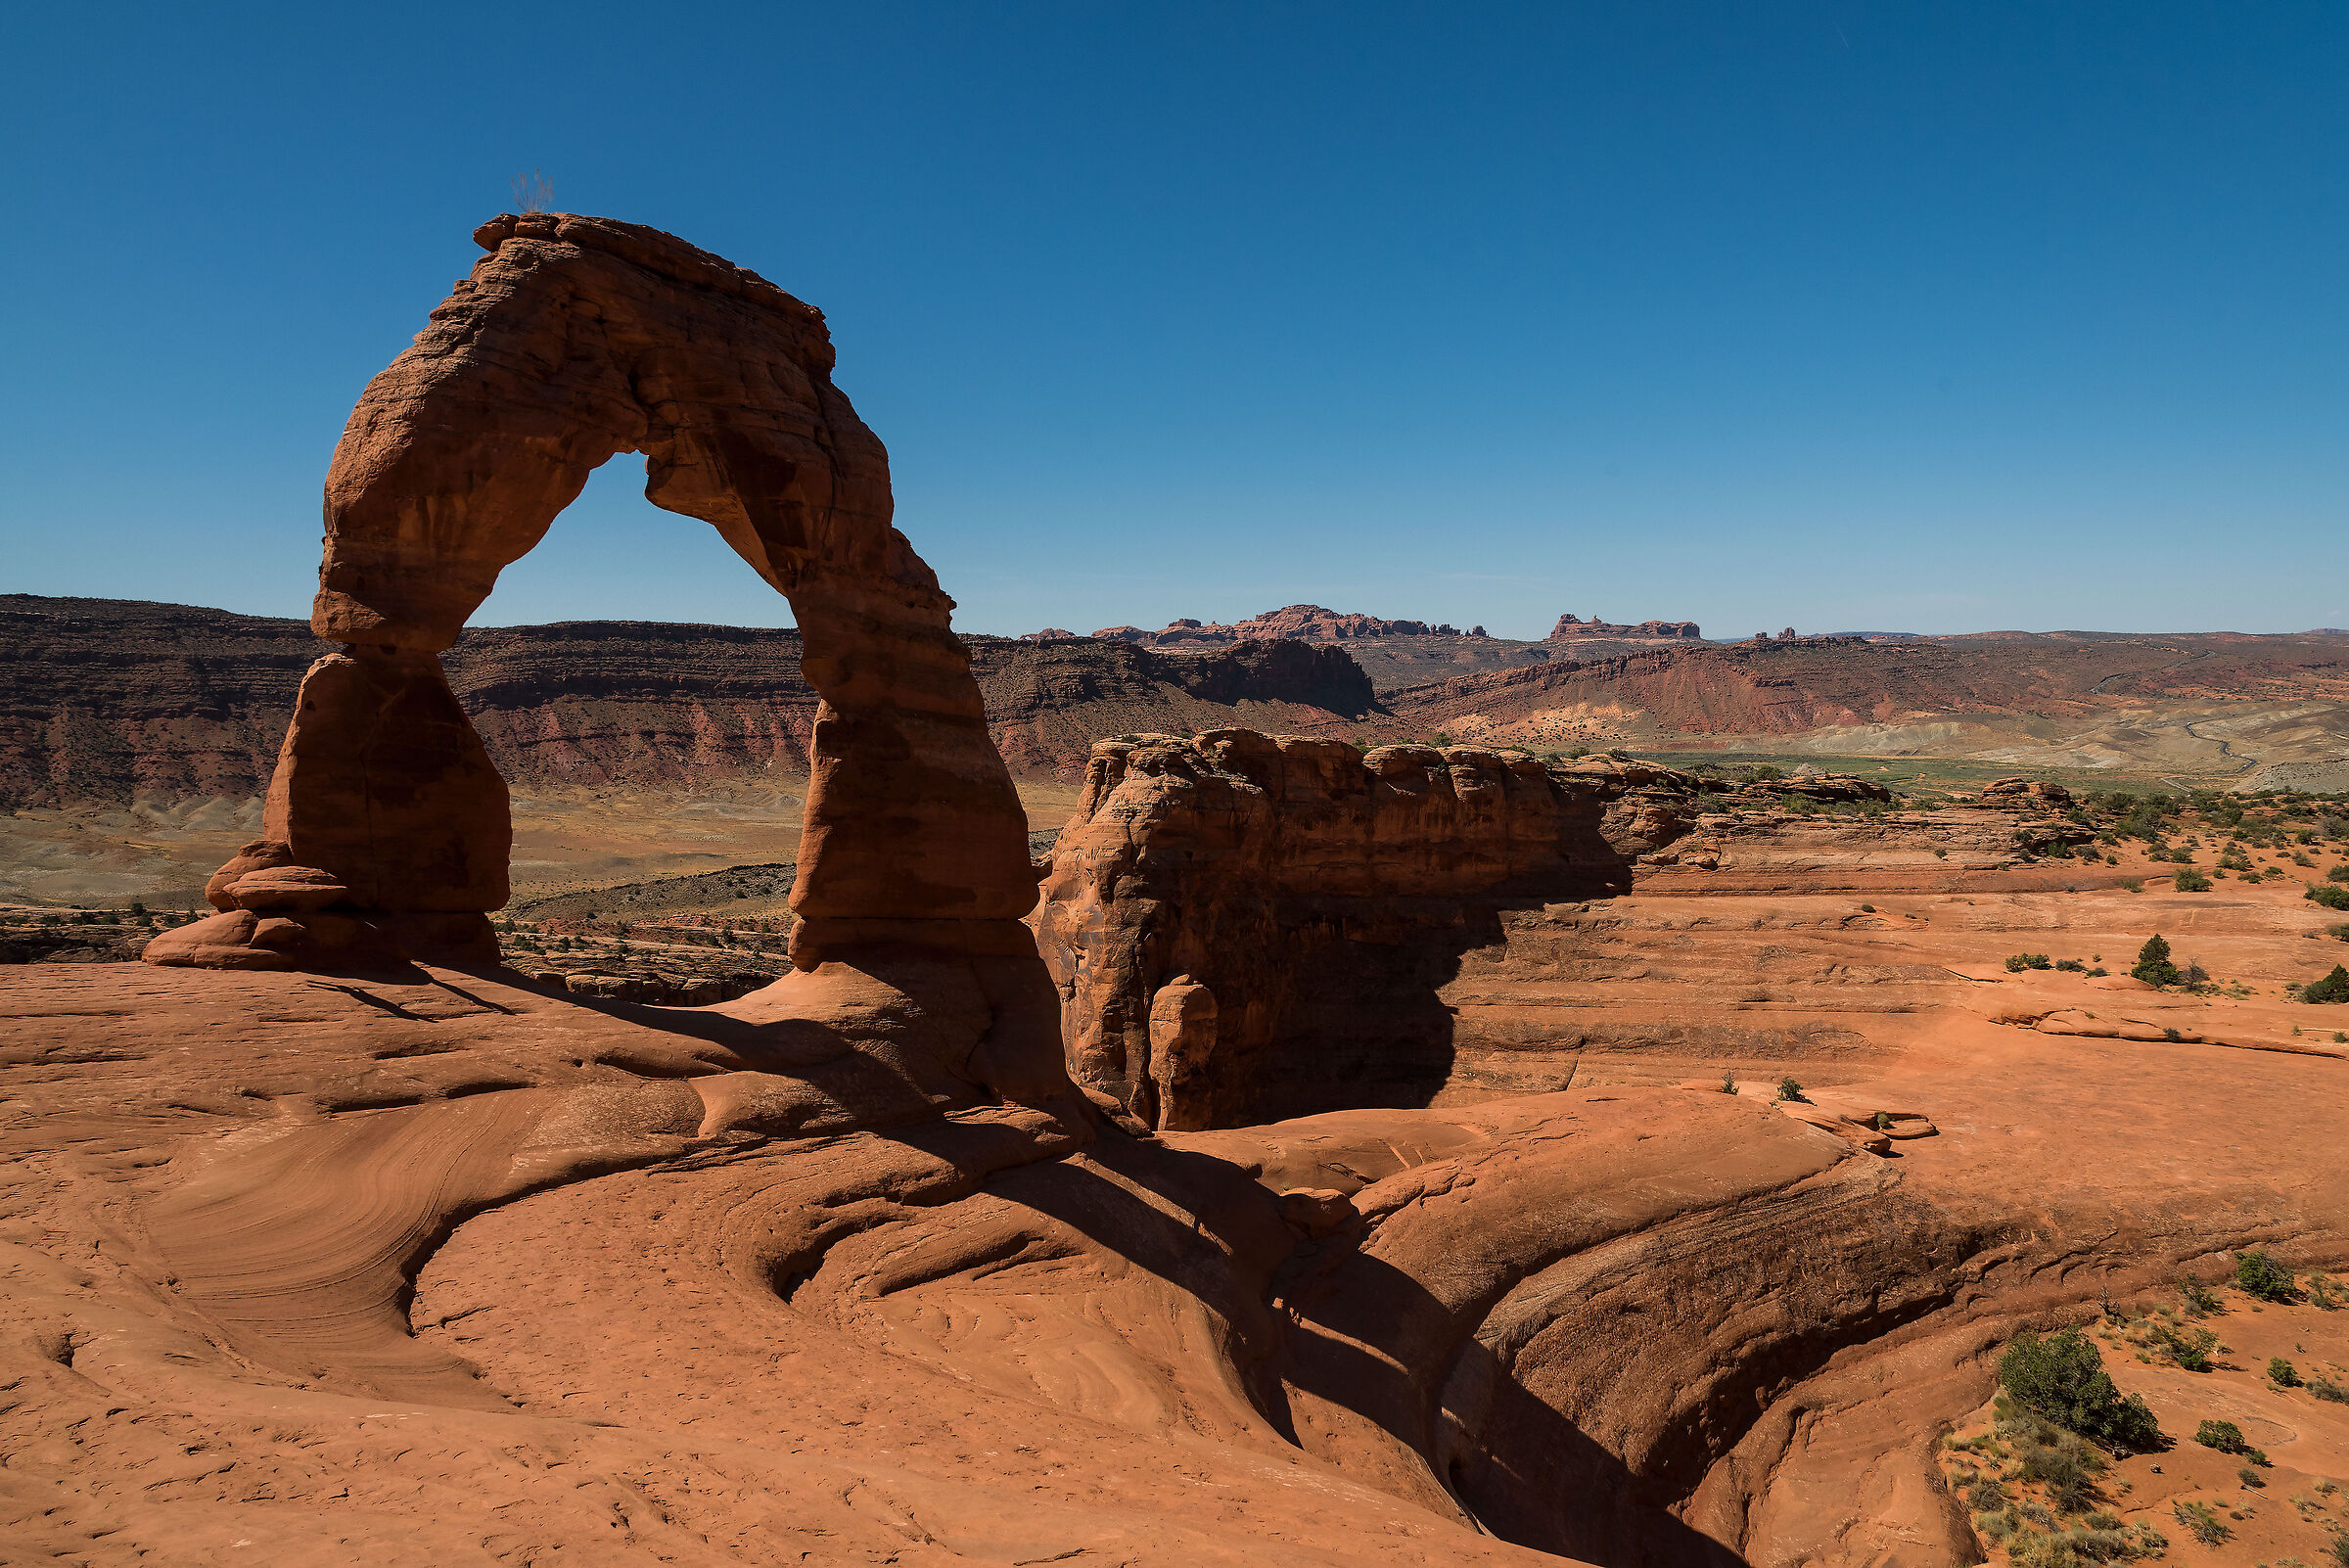 Her Majesty the Delicate Arch...